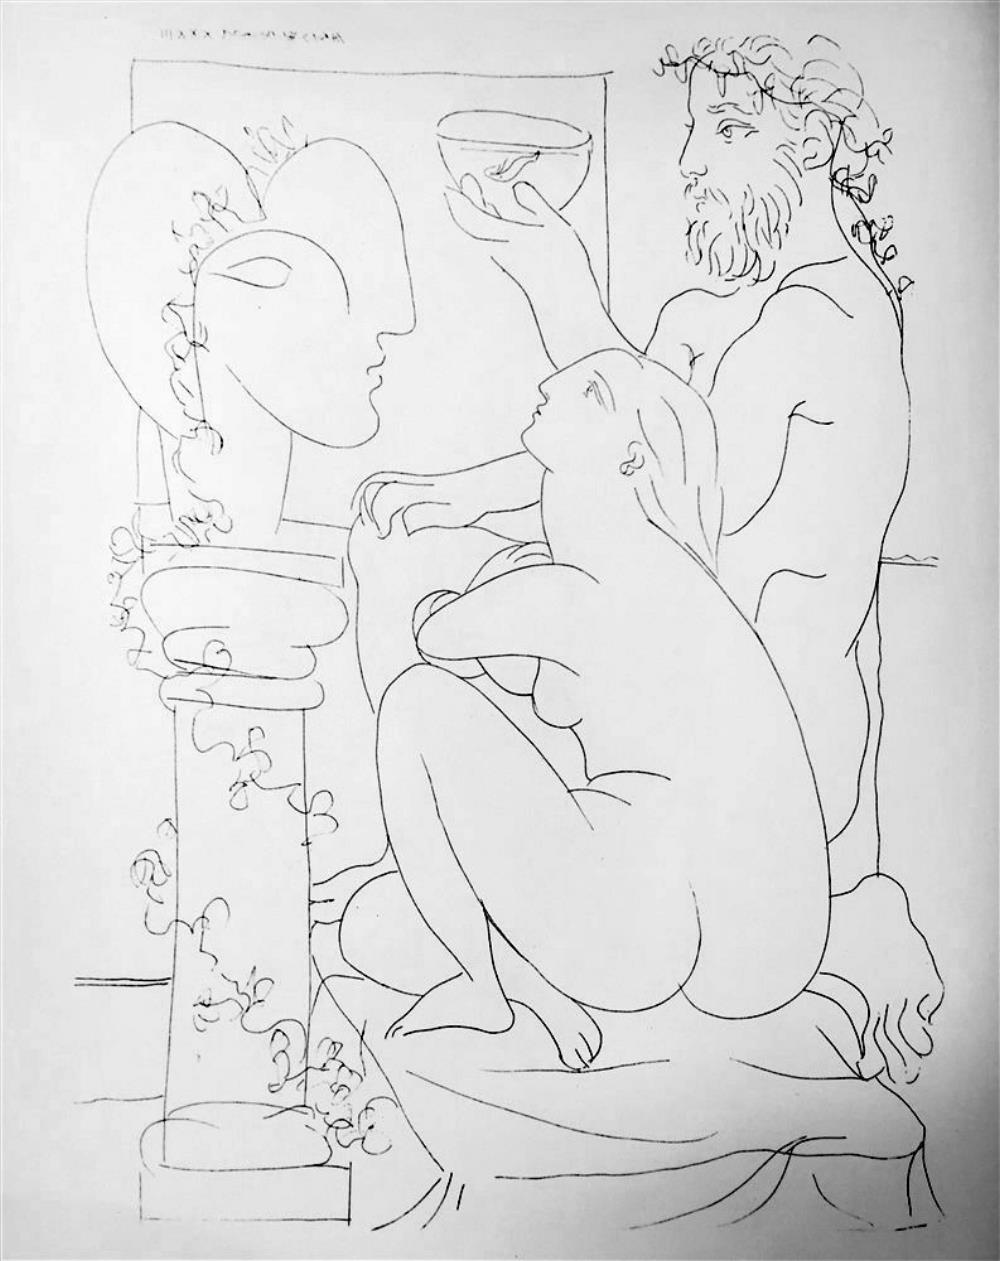 Pablo Picasso Sculptor, Model and Fishbowl c. 1933 Fine Art Print from Museum Artist